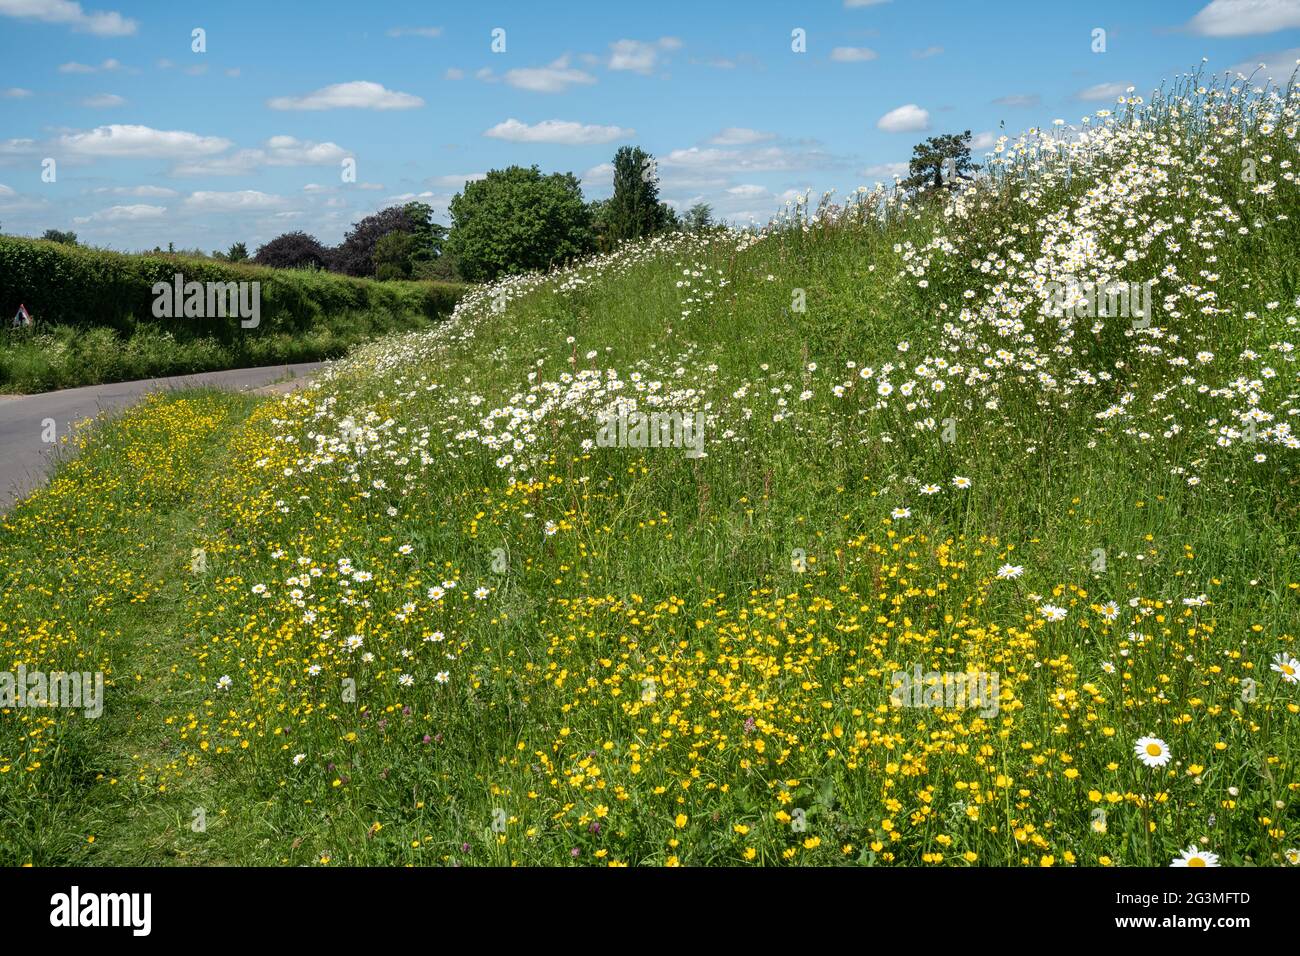 Wildflowers on a road verge during June, including oxeye daisies (Leucanthemum vulgare), on a sunny June day against a blue sky, Hampshire, UK Stock Photo